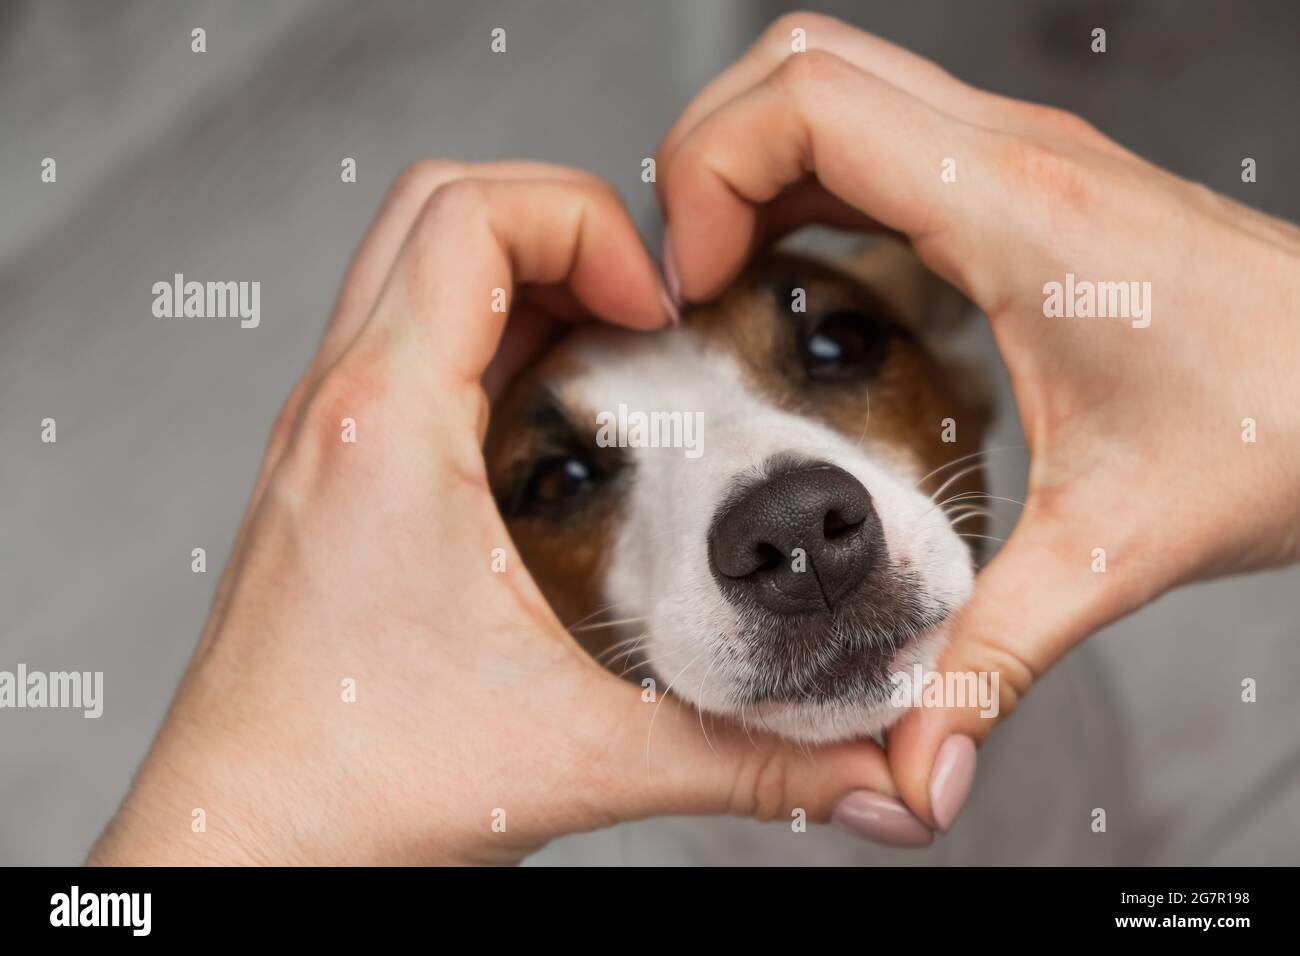 Jack russell terrier dog muzzle and female hands in the shape of a heart. Stock Photo